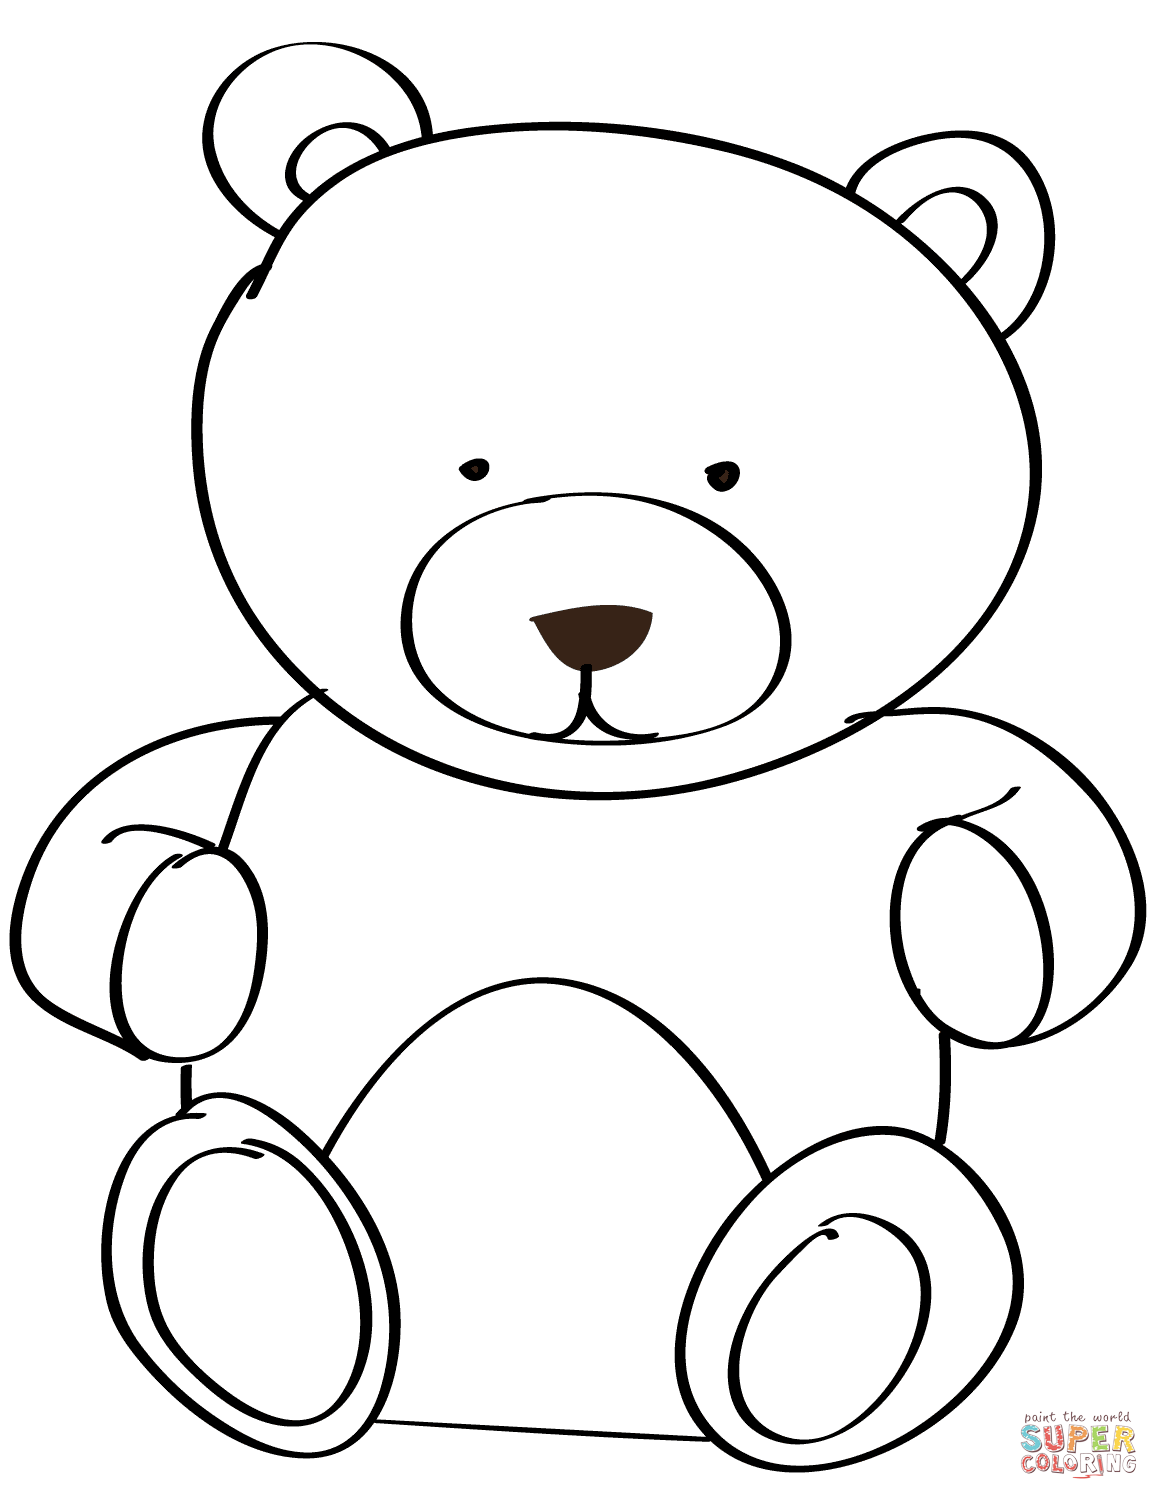 Teddy Bear coloring page | Free Printable Coloring Pages